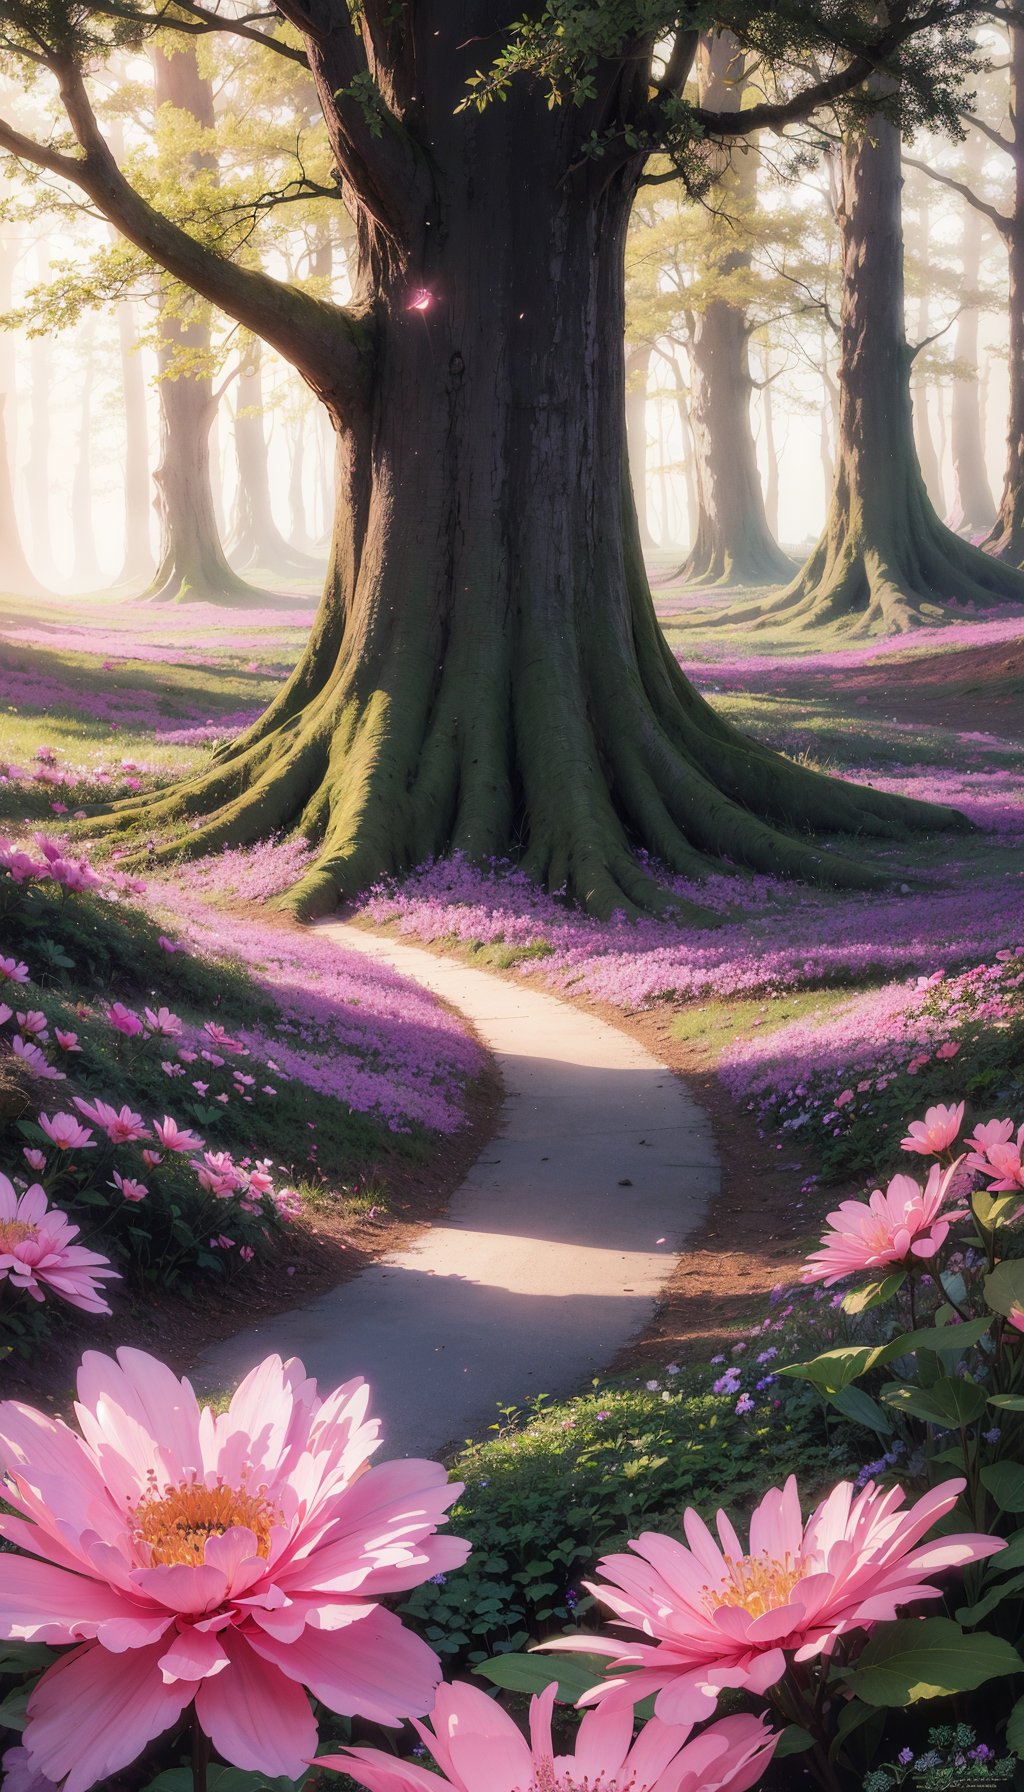 digital painting,
fantasy, hidden forest, centered big tree, [glowing crystals], flowers, flowers petal, fog, at dawn